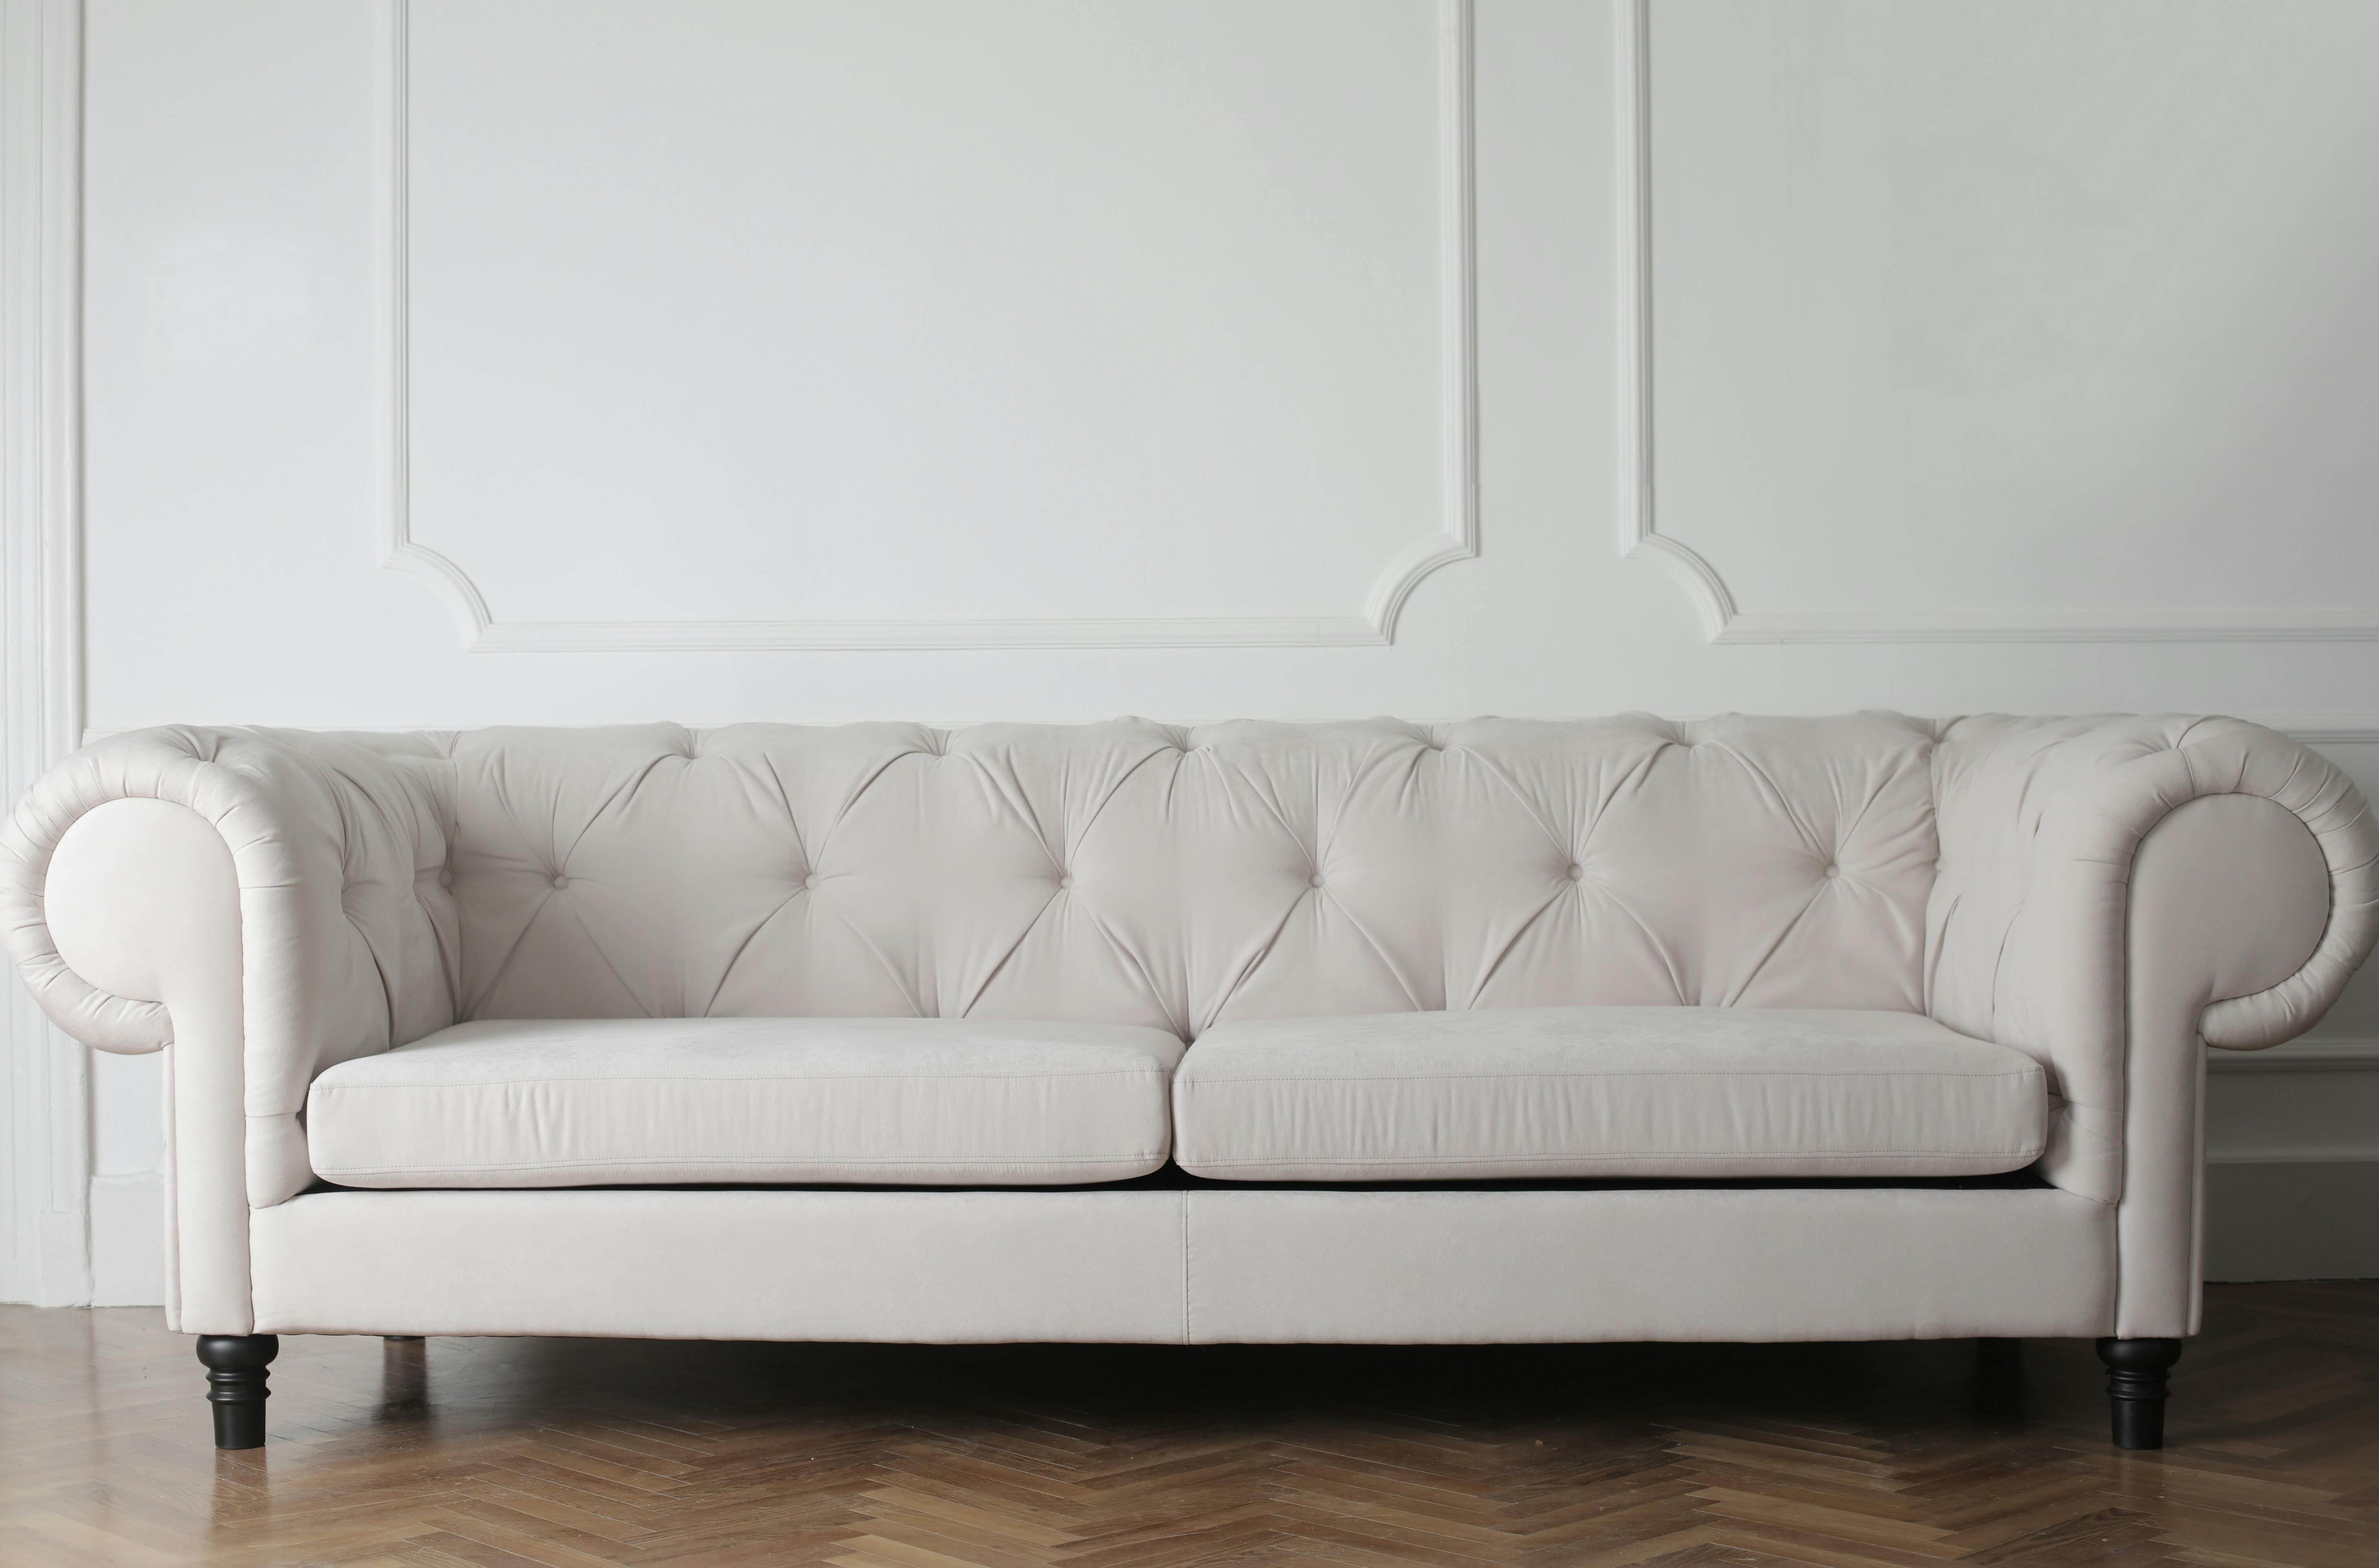 Sofa Photos, Download The BEST Free Sofa Stock Photos & HD Images